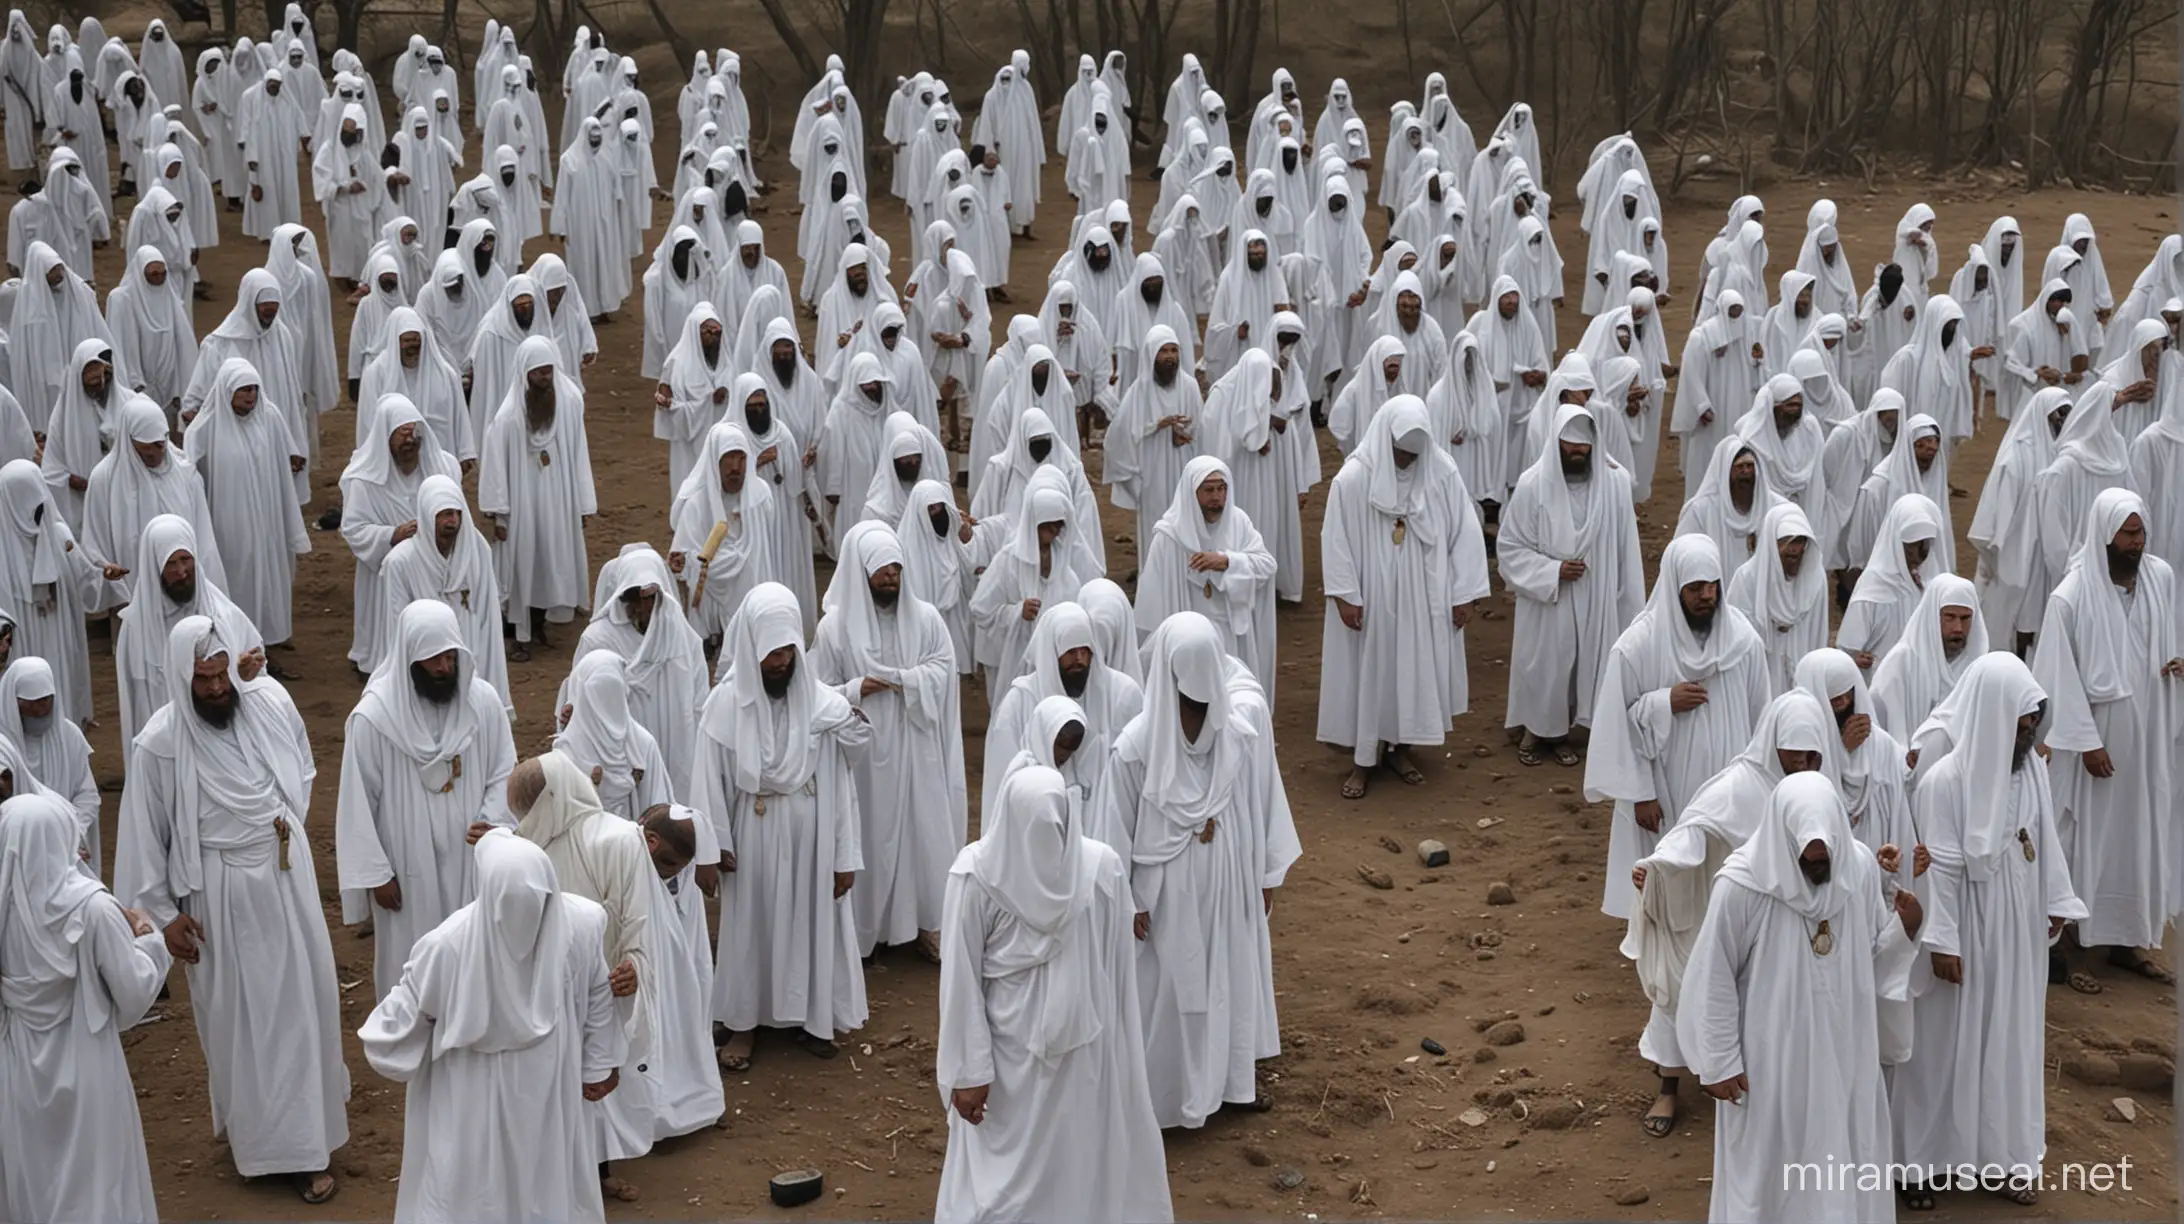 some human death of sect followers, wearing white robes, performing sexual rituals, worshiping Satan
